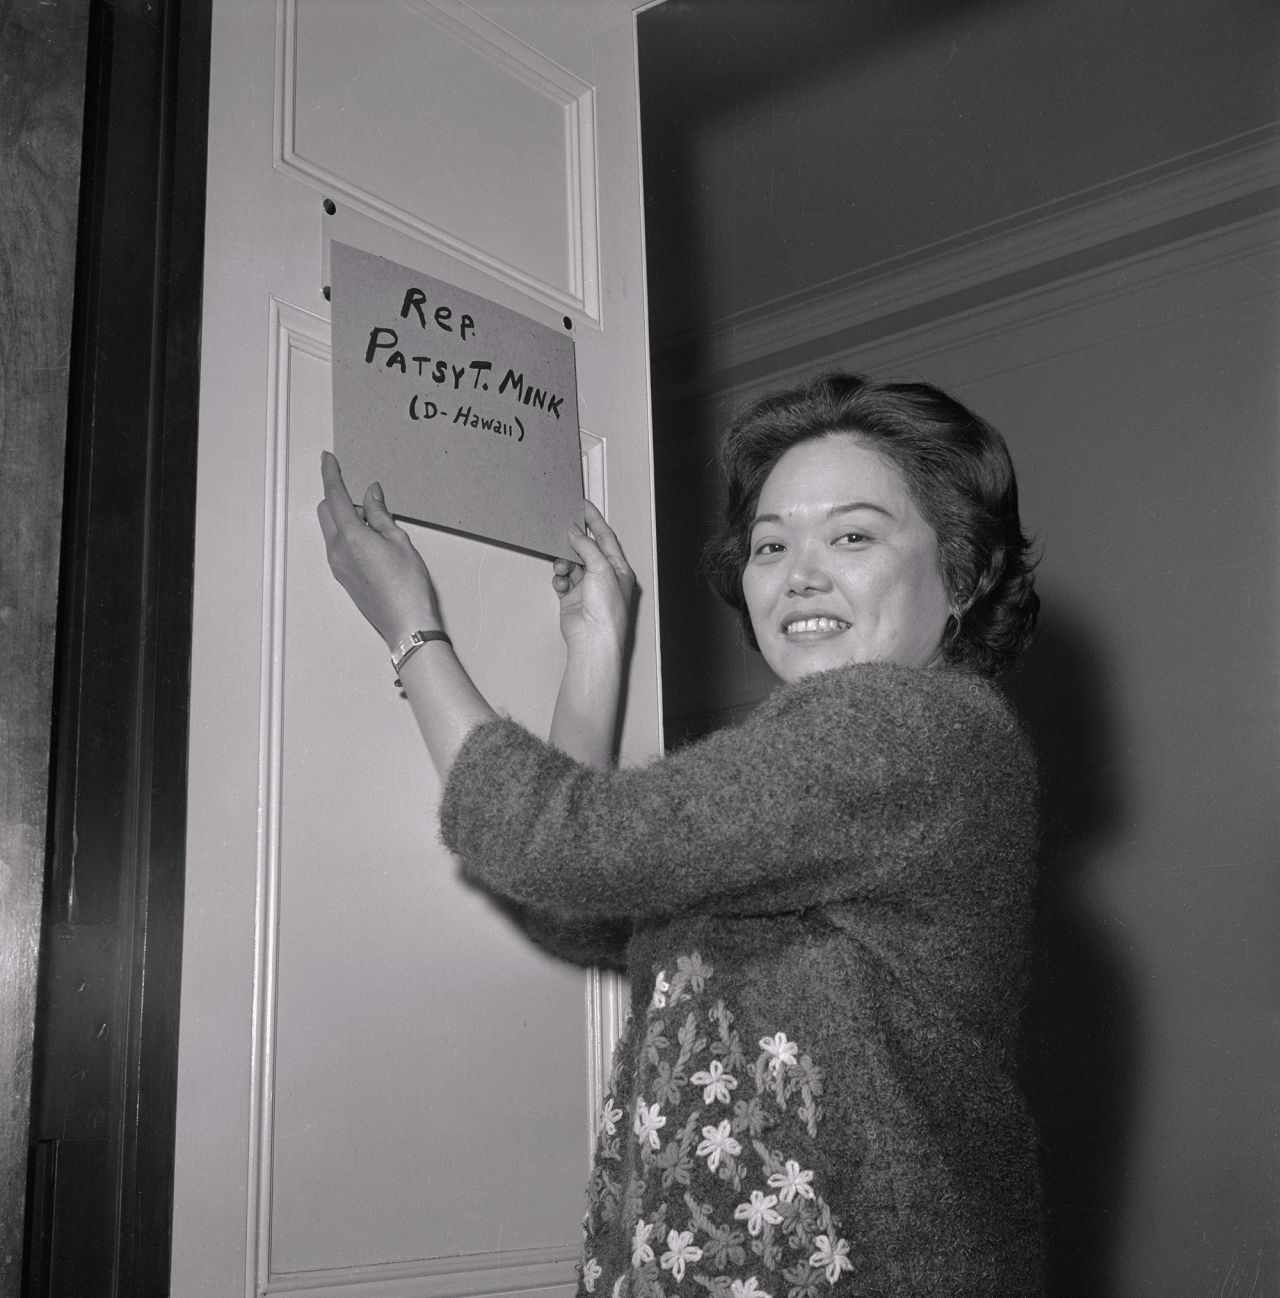 US Rep. Patsy Mink hangs a homemade nameplate on the door of her new office after becoming the first woman of color and the first Asian American woman elected to Congress in 1965. Mink's tenure in office focused on fighting for gender and racial equality. She helped author Title IX, a law prohibiting sex-based discrimination in federally funded education programs and activities.